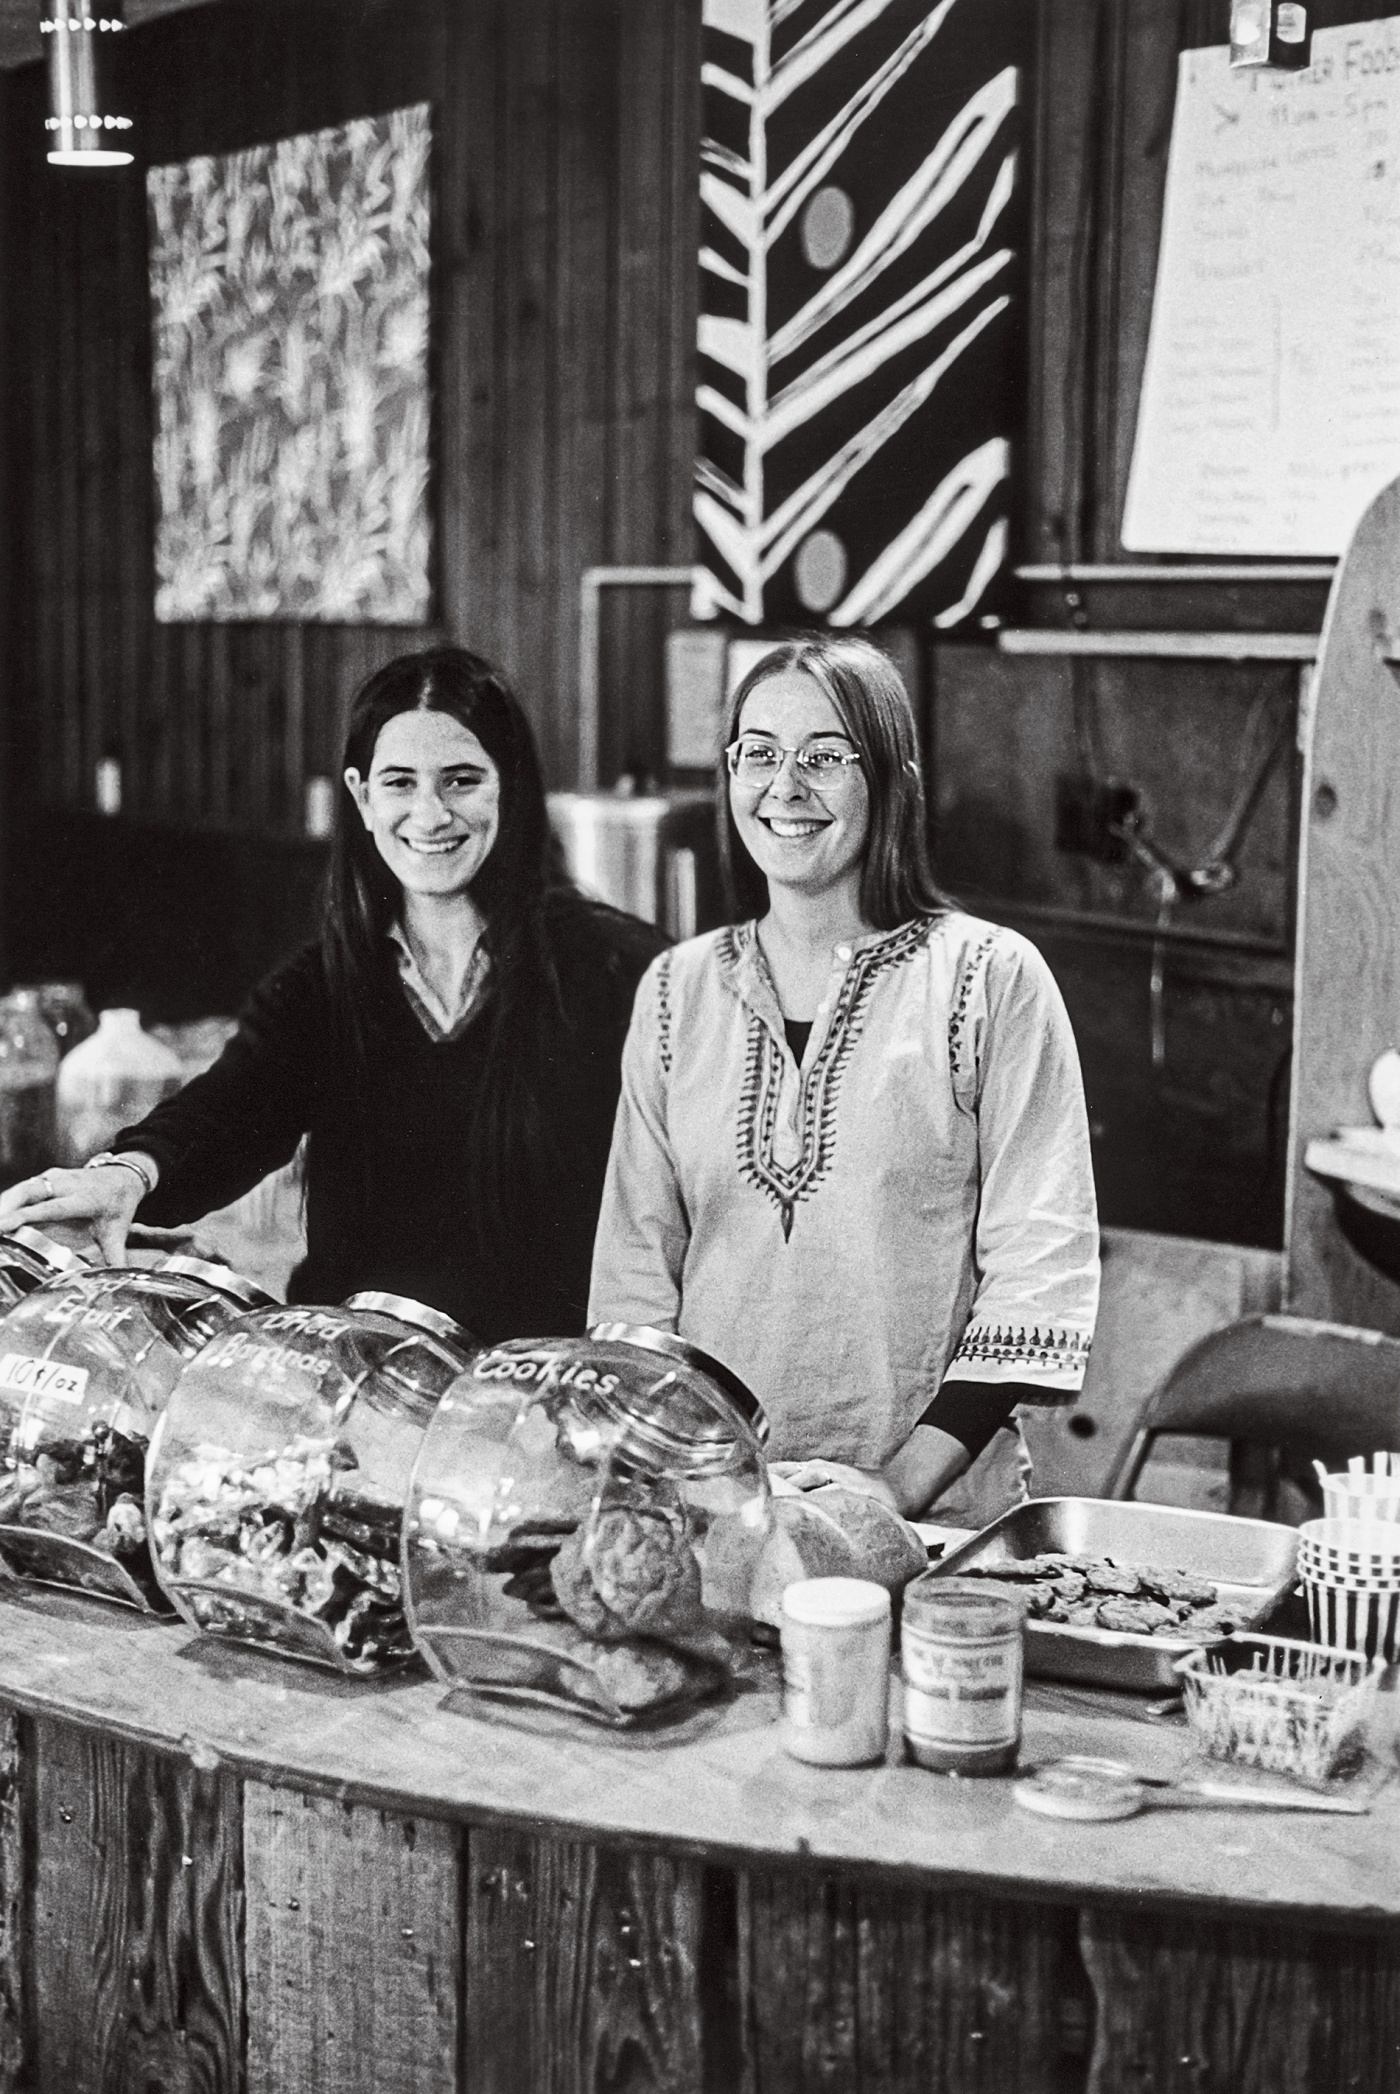 “Ahh! That Muenster on delicious pumpernickel!” remembers Marsha Jones ’76. Leslie Seeman ’73, left, pictured with Barb Goldman ’74, says they weighed the cheese to price it.  Neil Ward ’76 sold his whole wheat raisin “NeilBread” to the student-run coffeehouse, where you could buy vinyl from Mother Records and hear live acoustic music at night. “Lots of bell bottoms, floral shirts and flowing skirts, fringed jackets and love beads!” says Tony Affigne ’76, ’91 AM, ’92 PhD. “The atmosphere at Big Mother was e